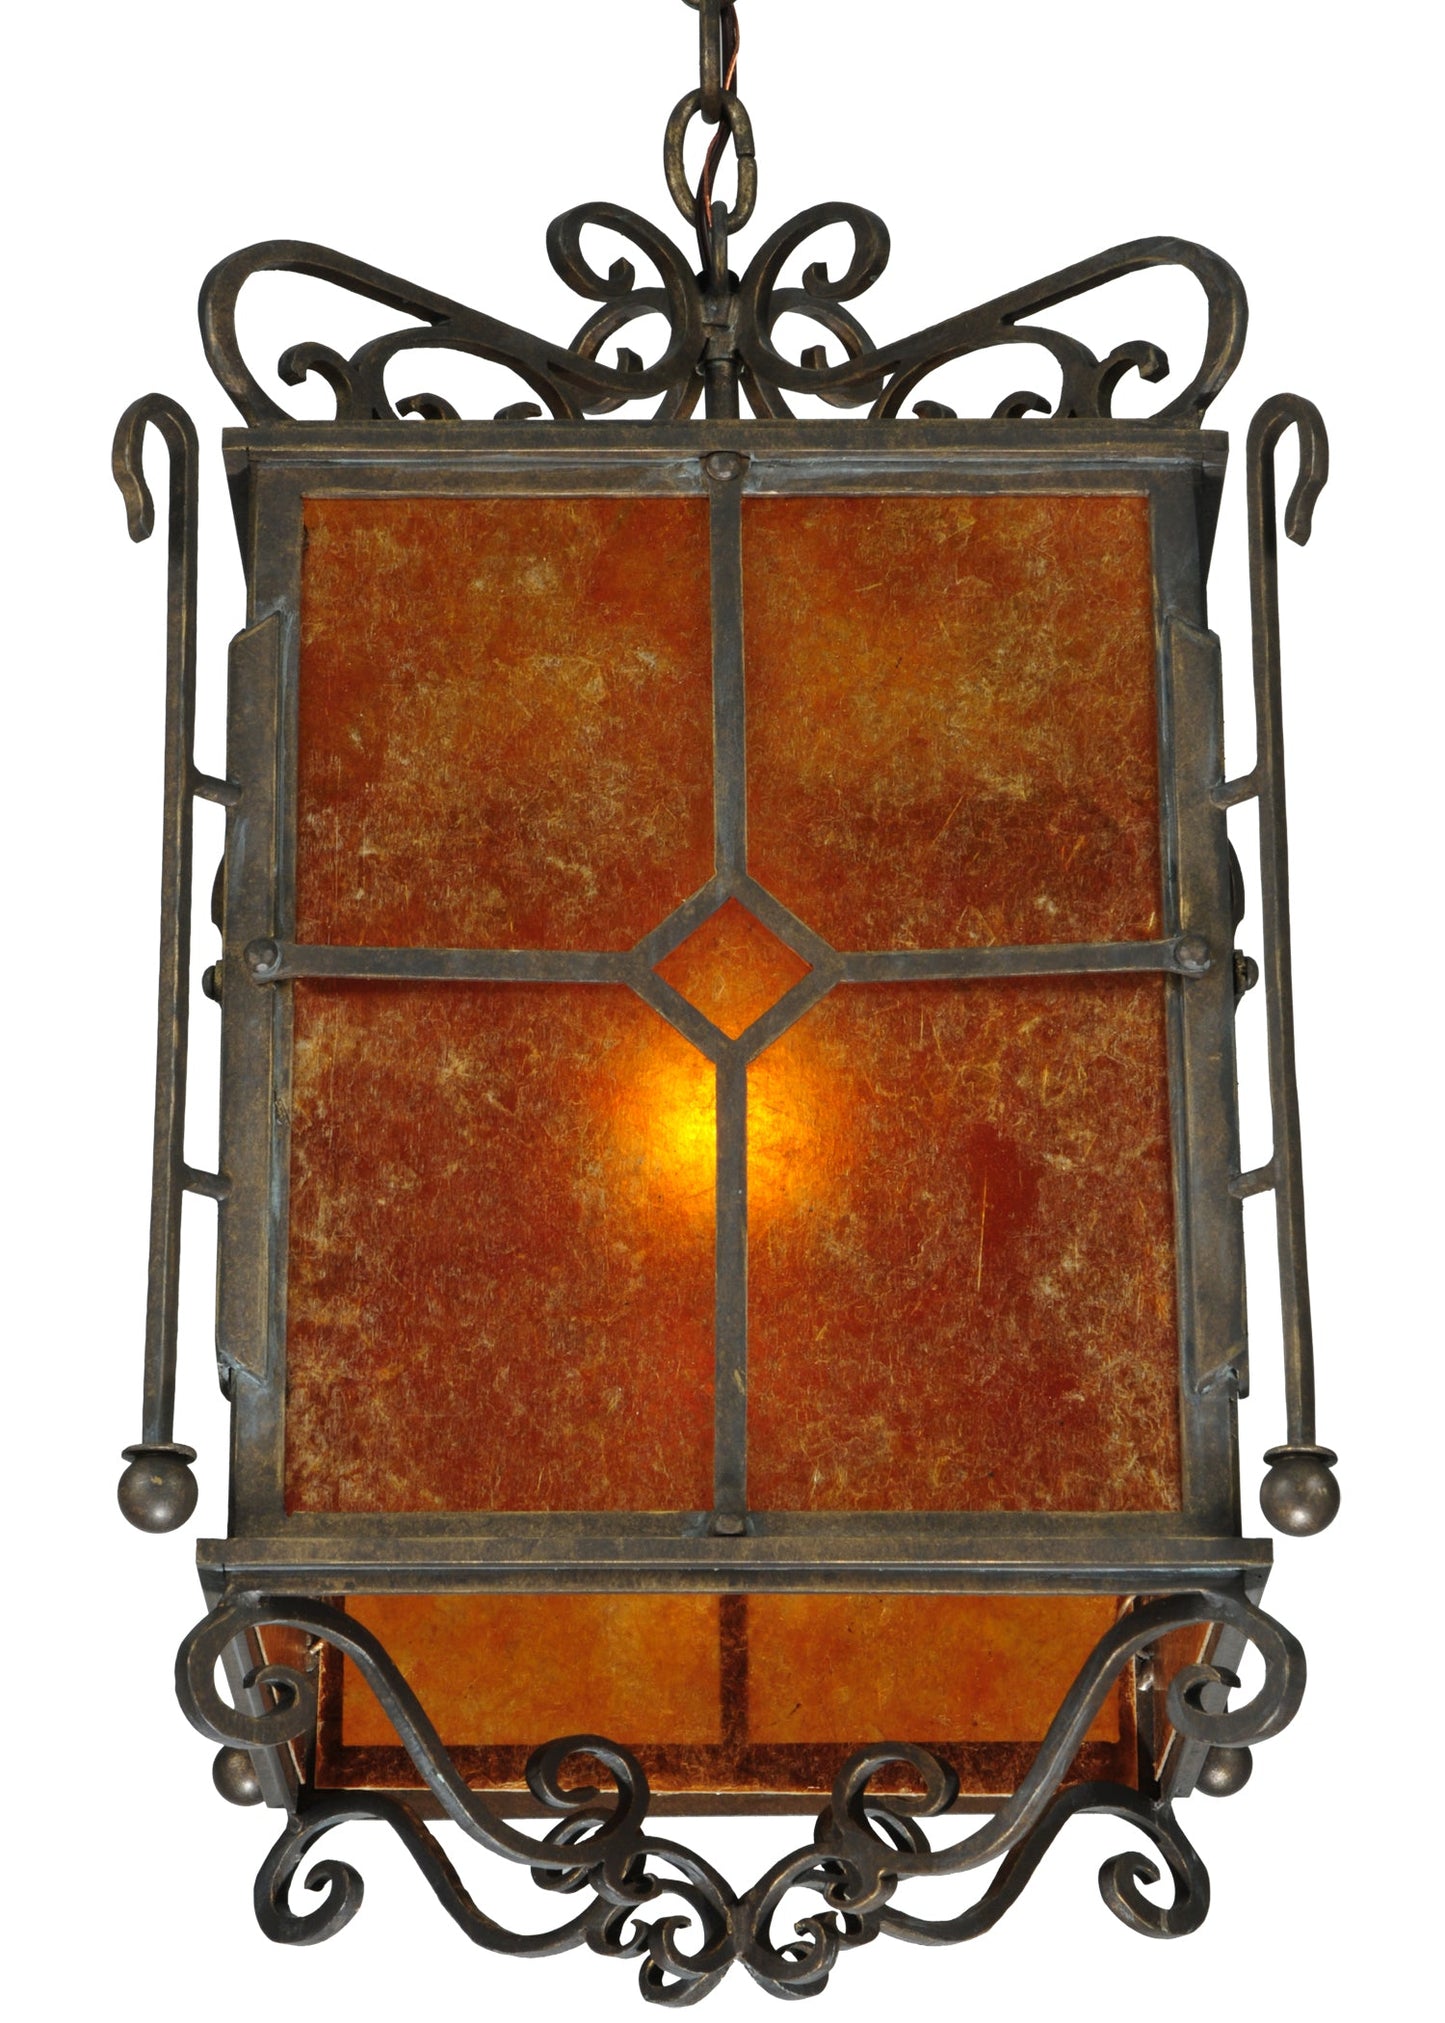 12" Square Standford Pendant by 2nd Ave Lighting